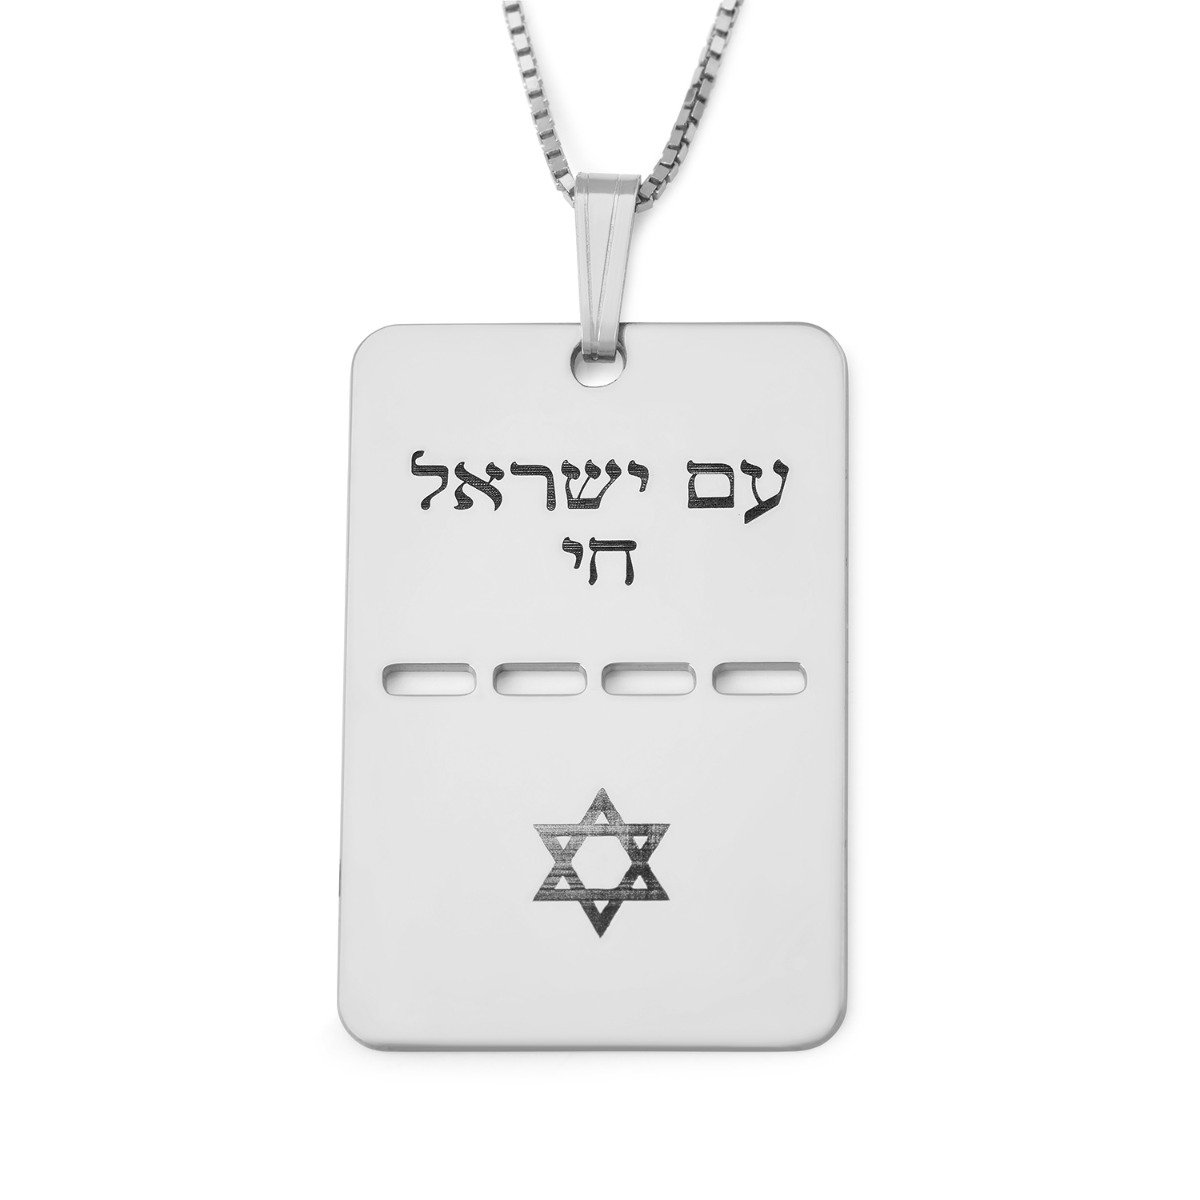 Double Thickness Star of David Dog Tag Necklace with Am Yisrael Chai - Silver or Gold-Plated - 1